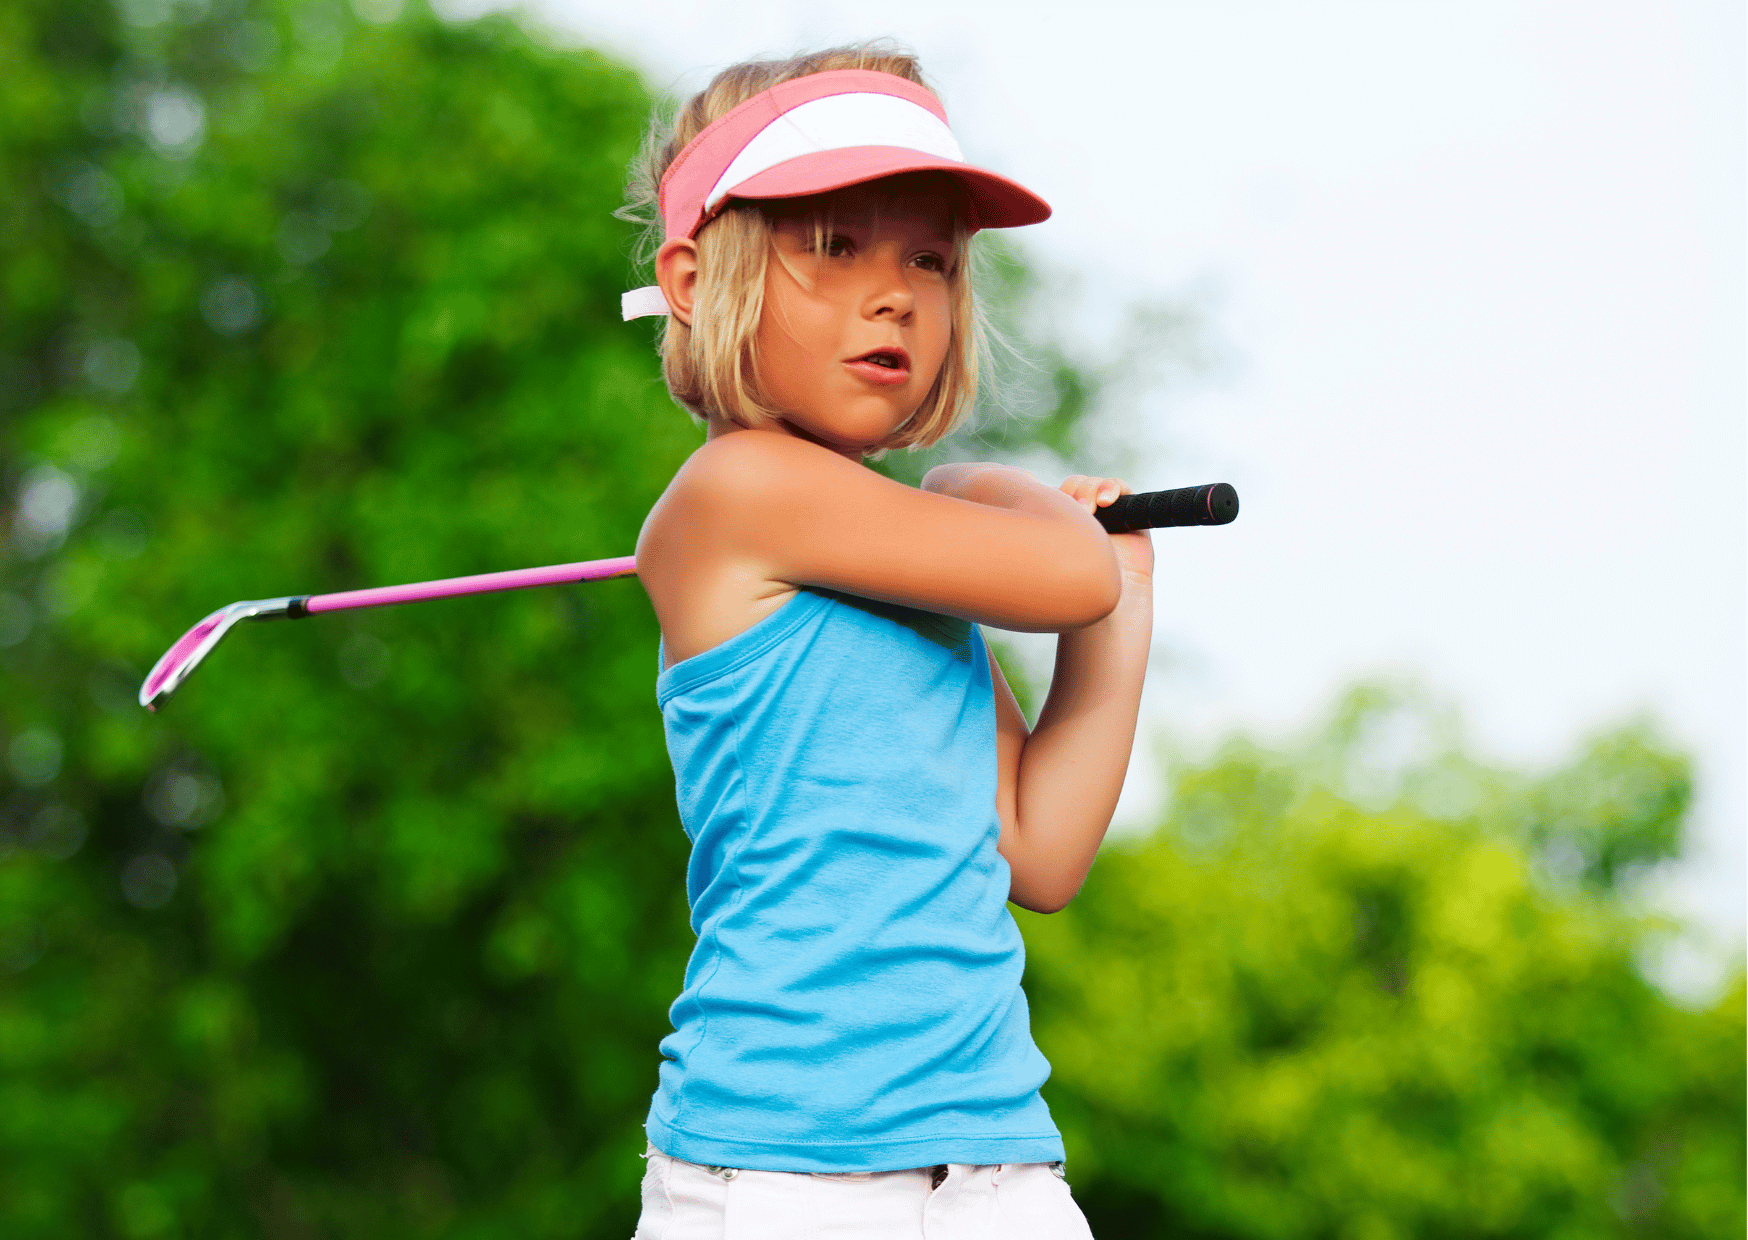 Young girl holding her pose after hitting a golf ball